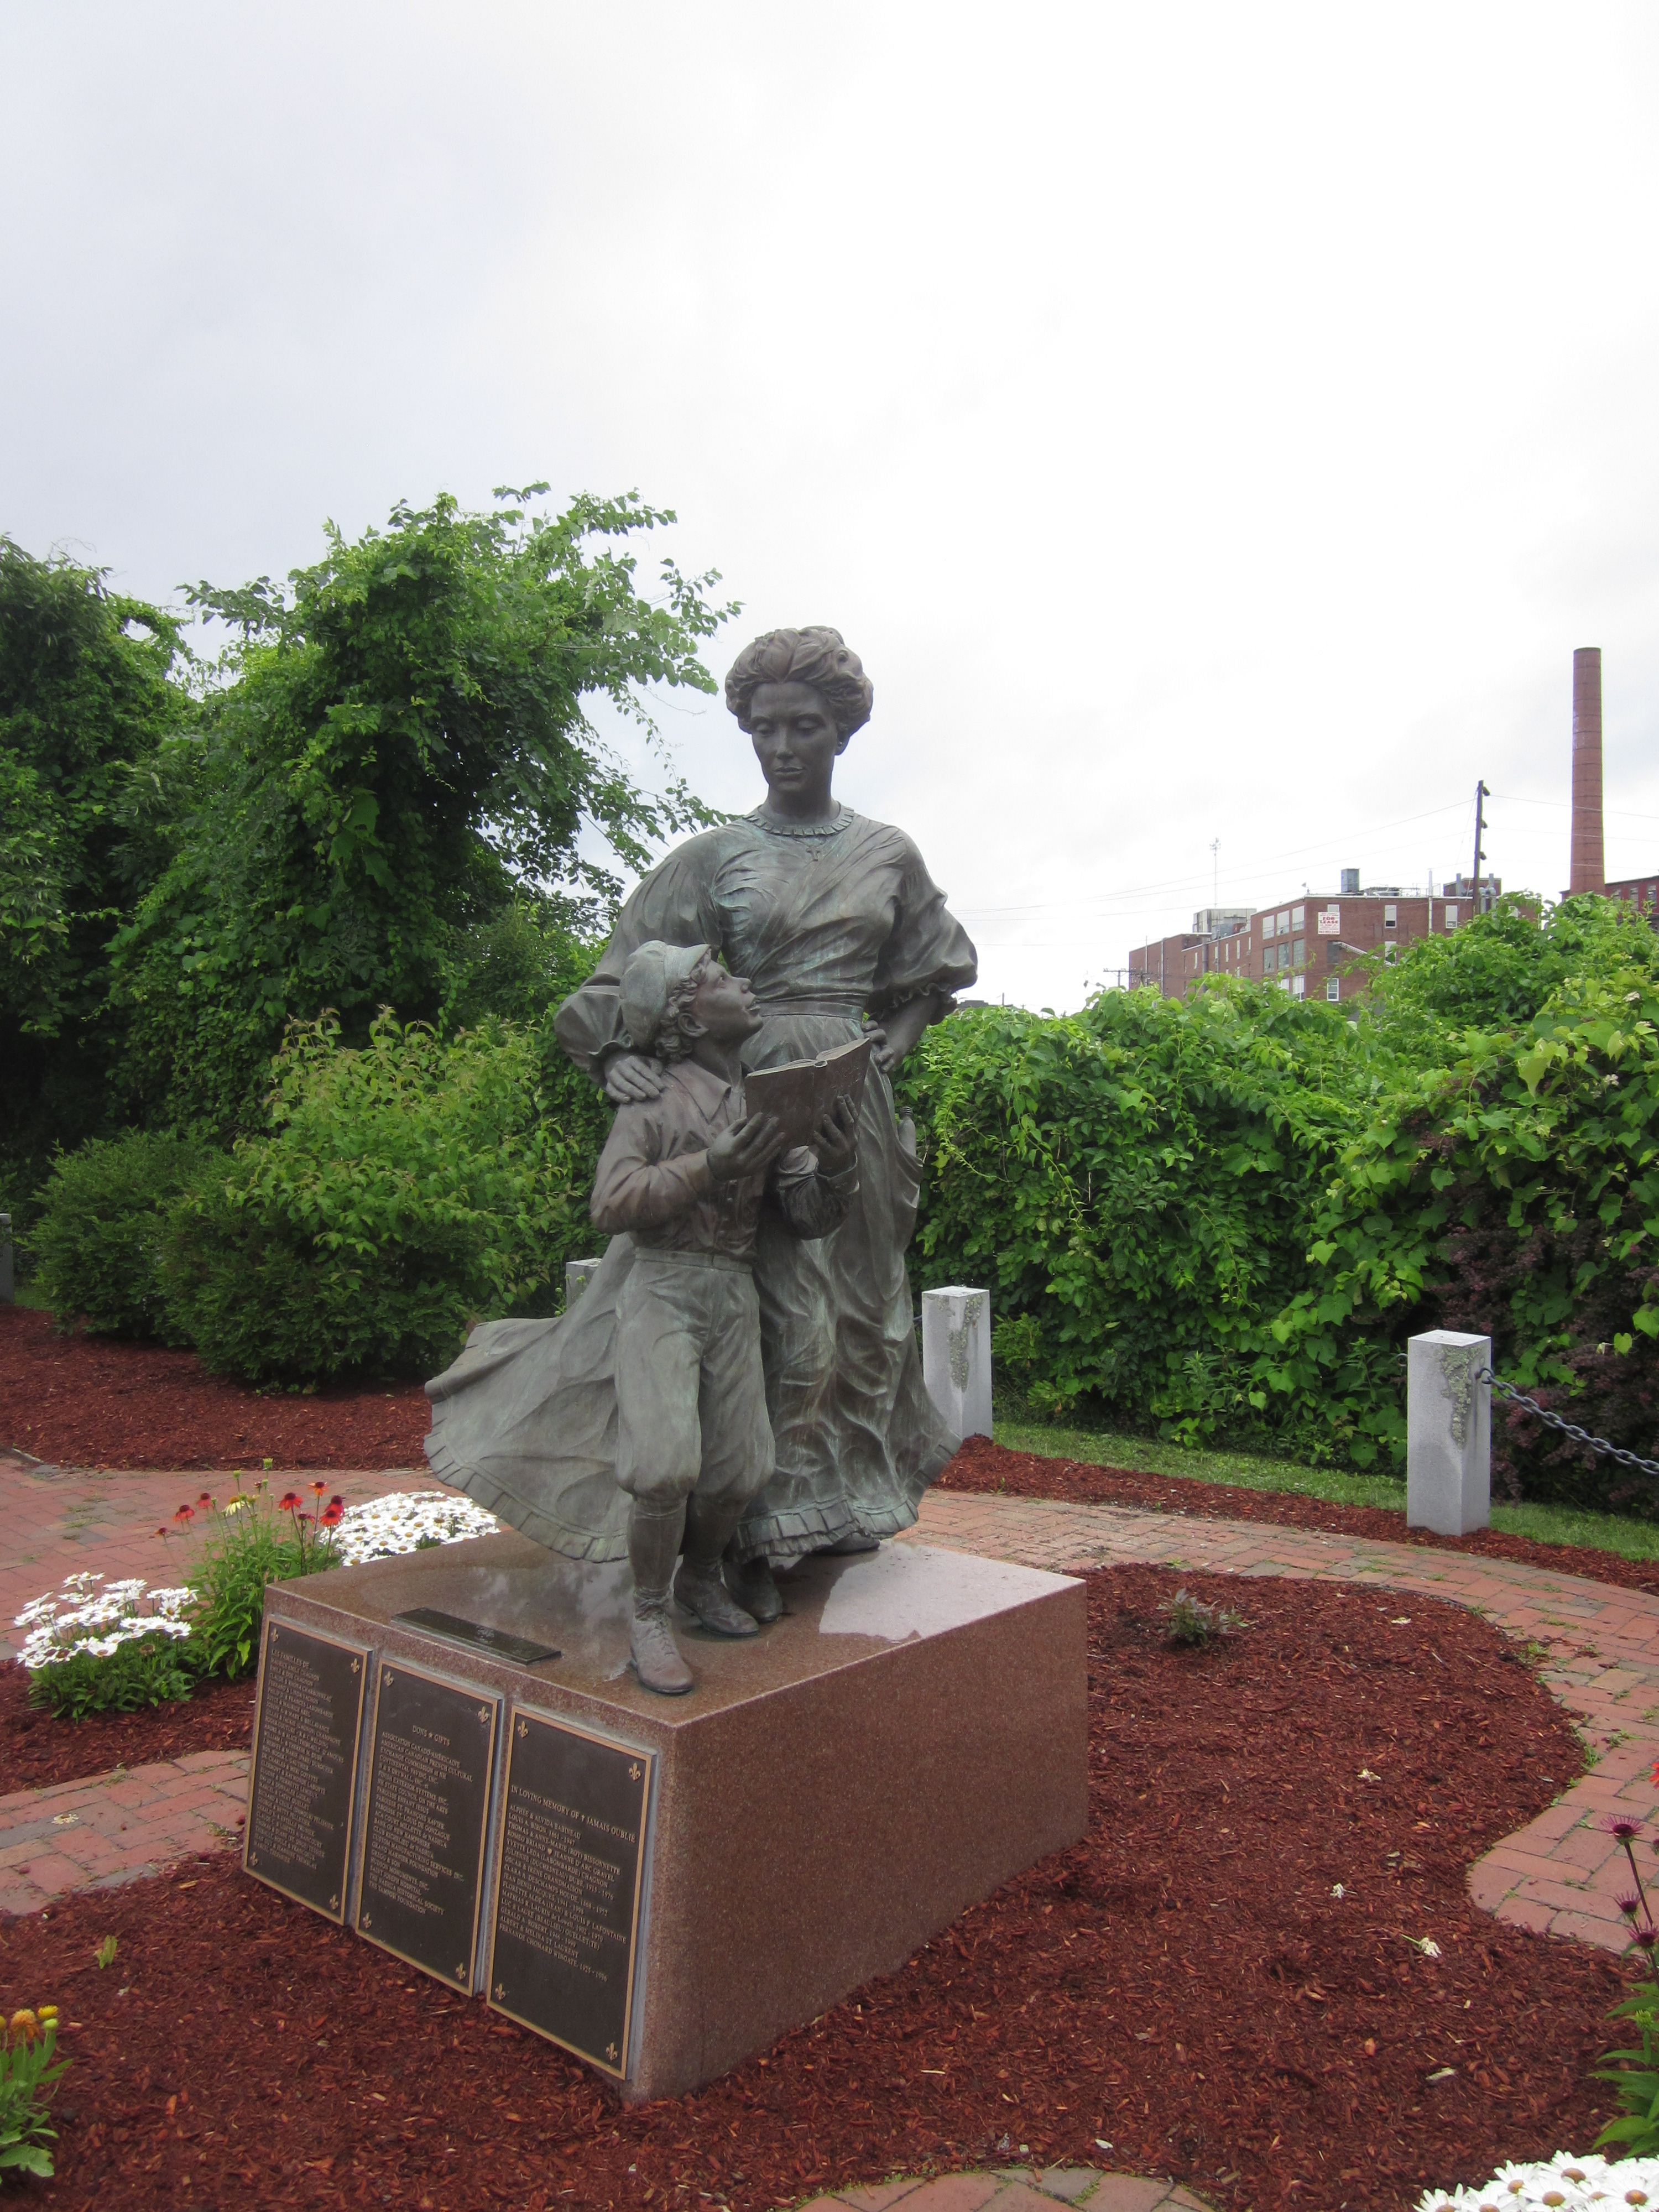 Statue of a woman and her young son holding a book.